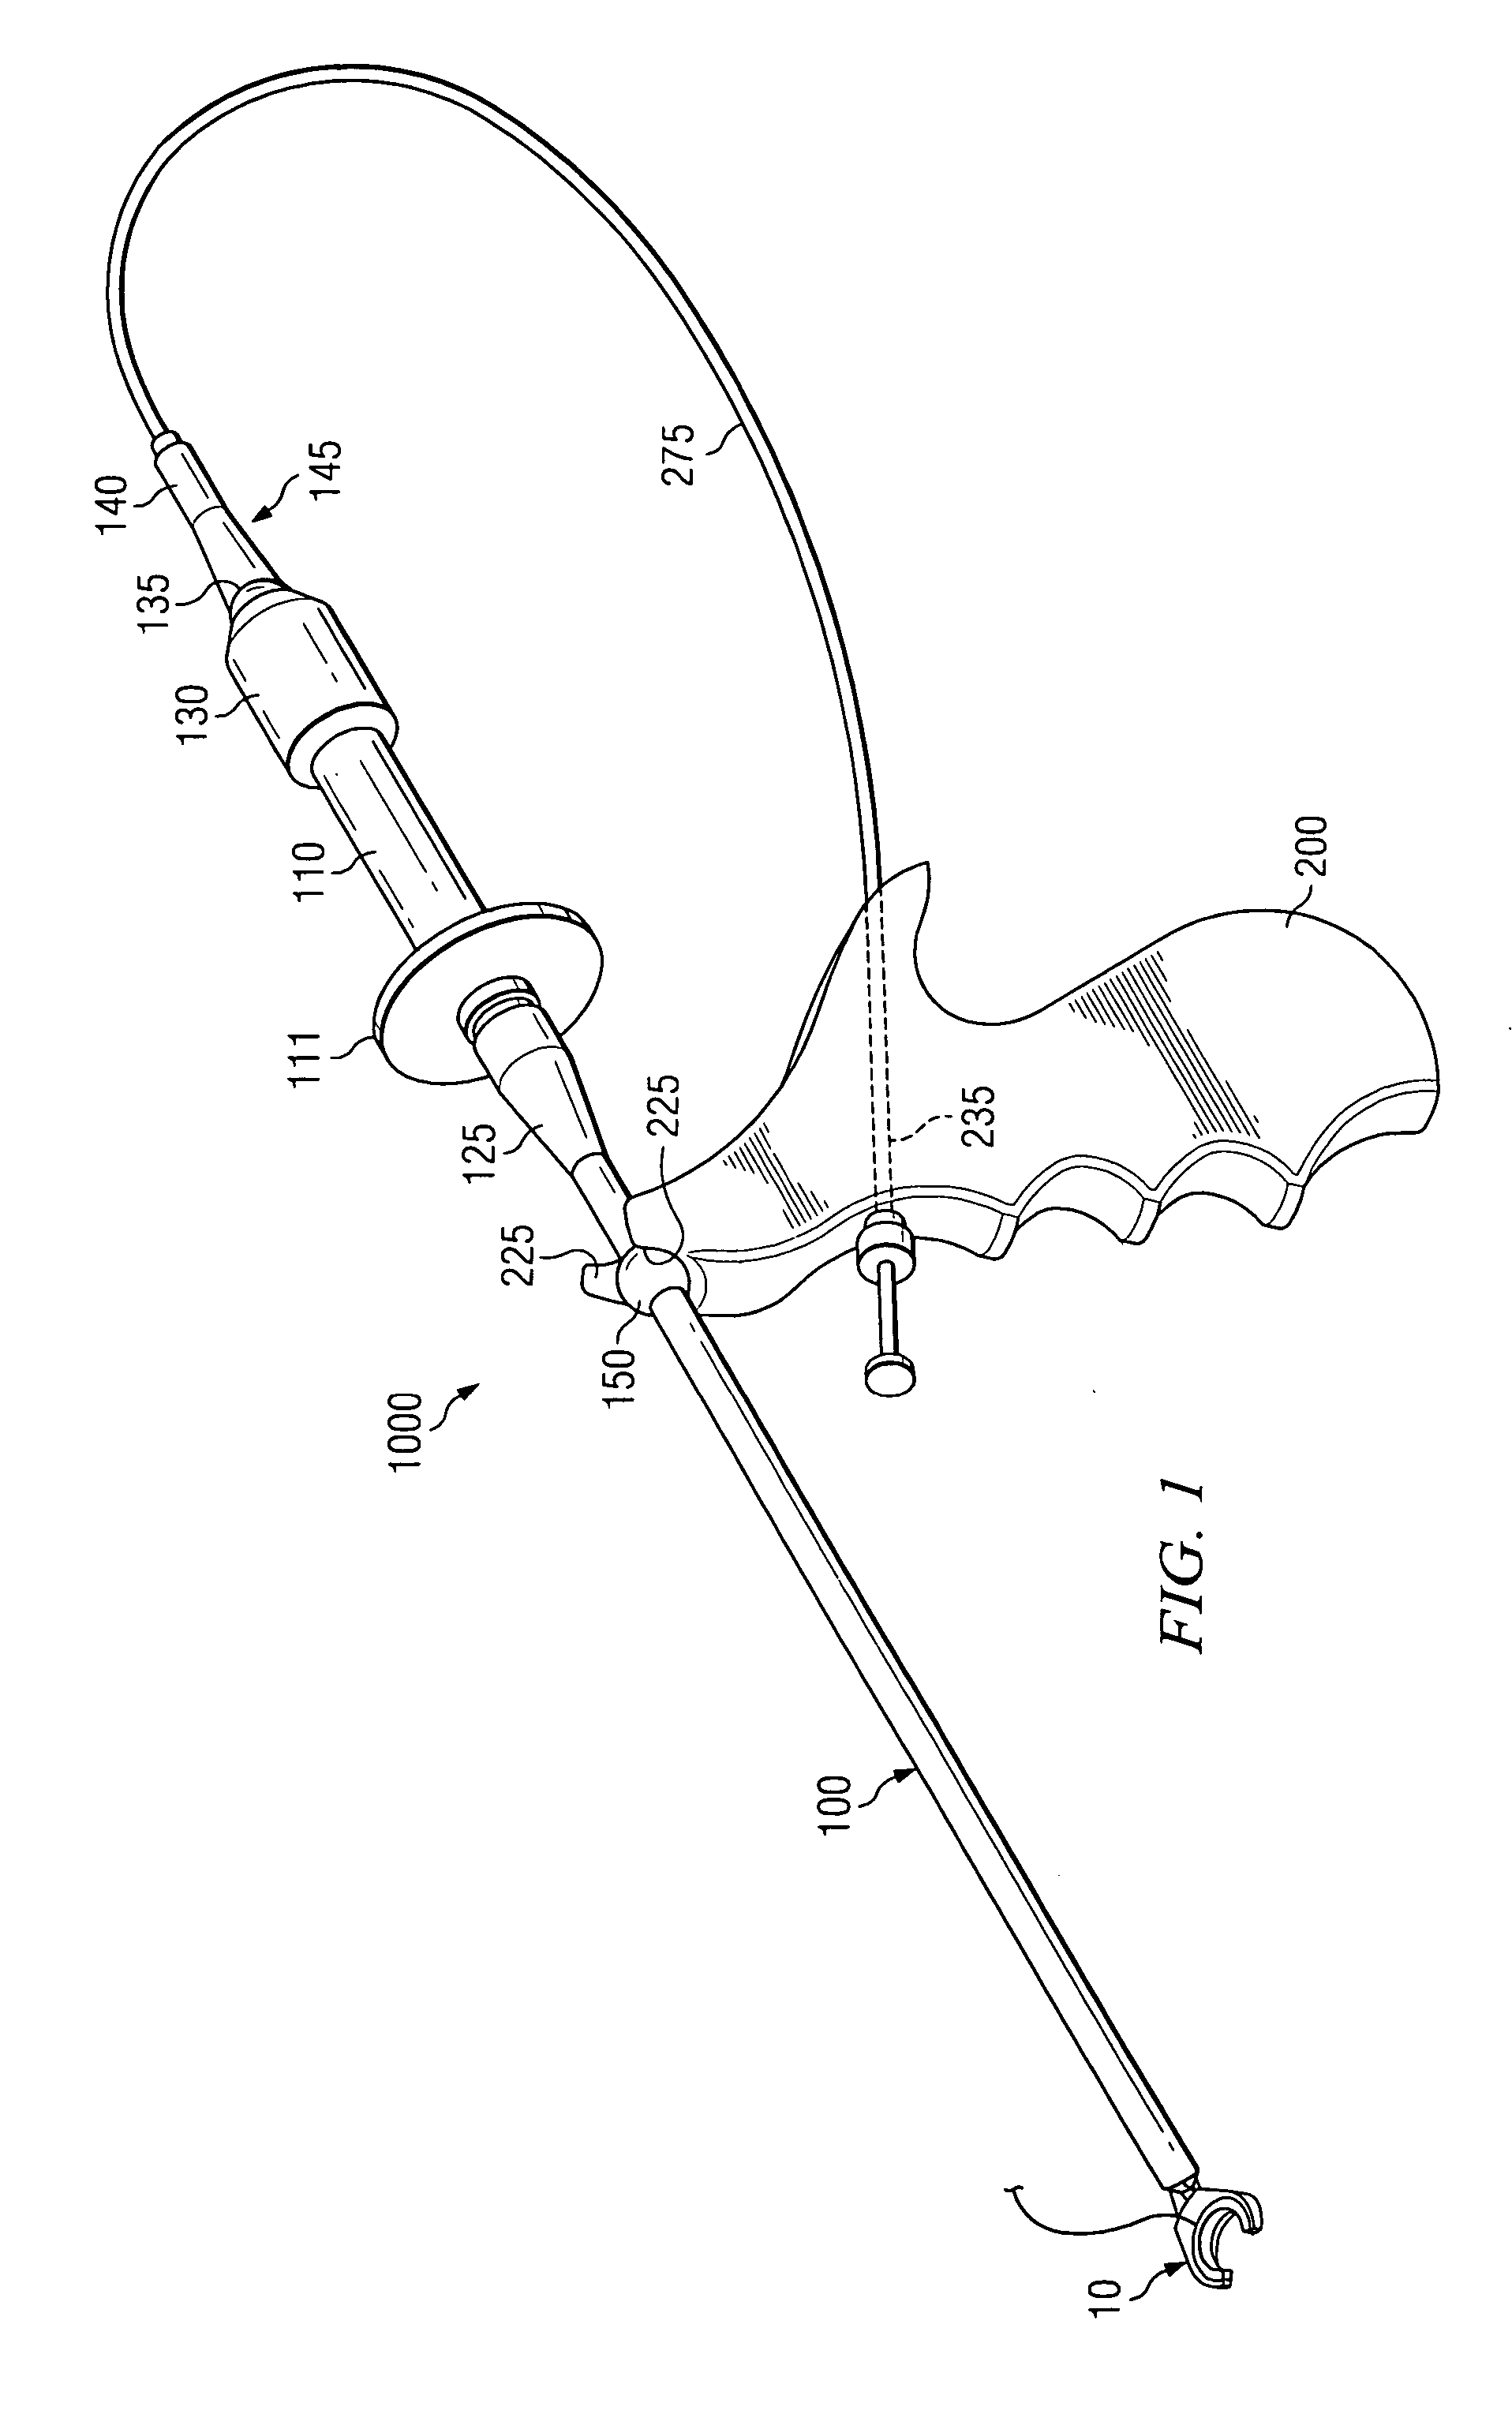 Leverage locking reversible cyclic suturing and knot-tying device